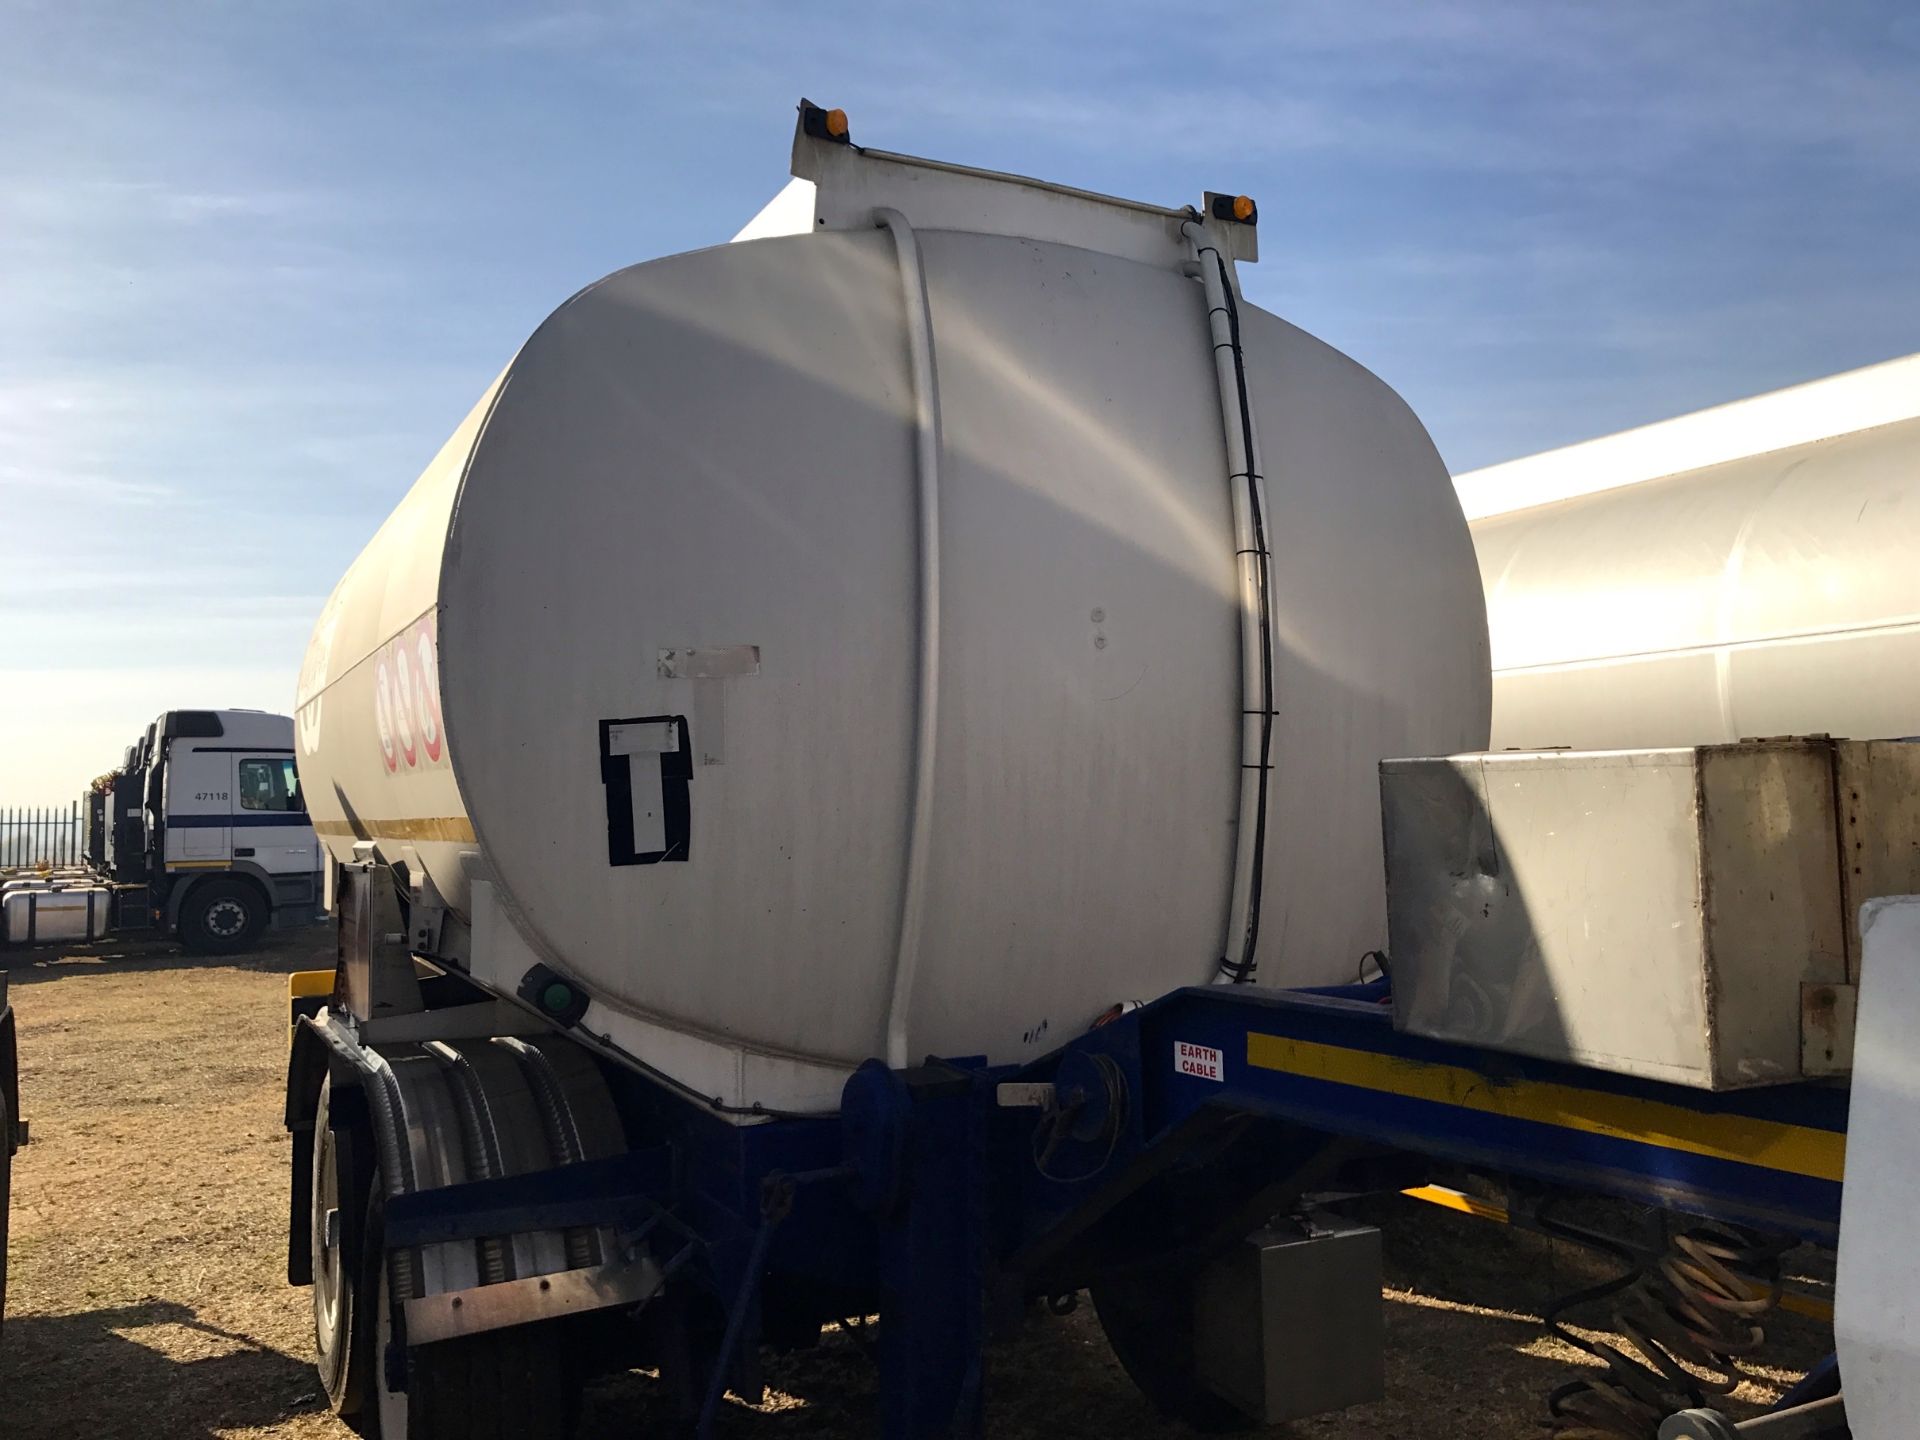 2005 GRW D/AXLE ALUMINIUM TANKER TRAILER WITH D/AXLE ALIMINIUM PUP - (ND73841/ND61165) - Image 2 of 6